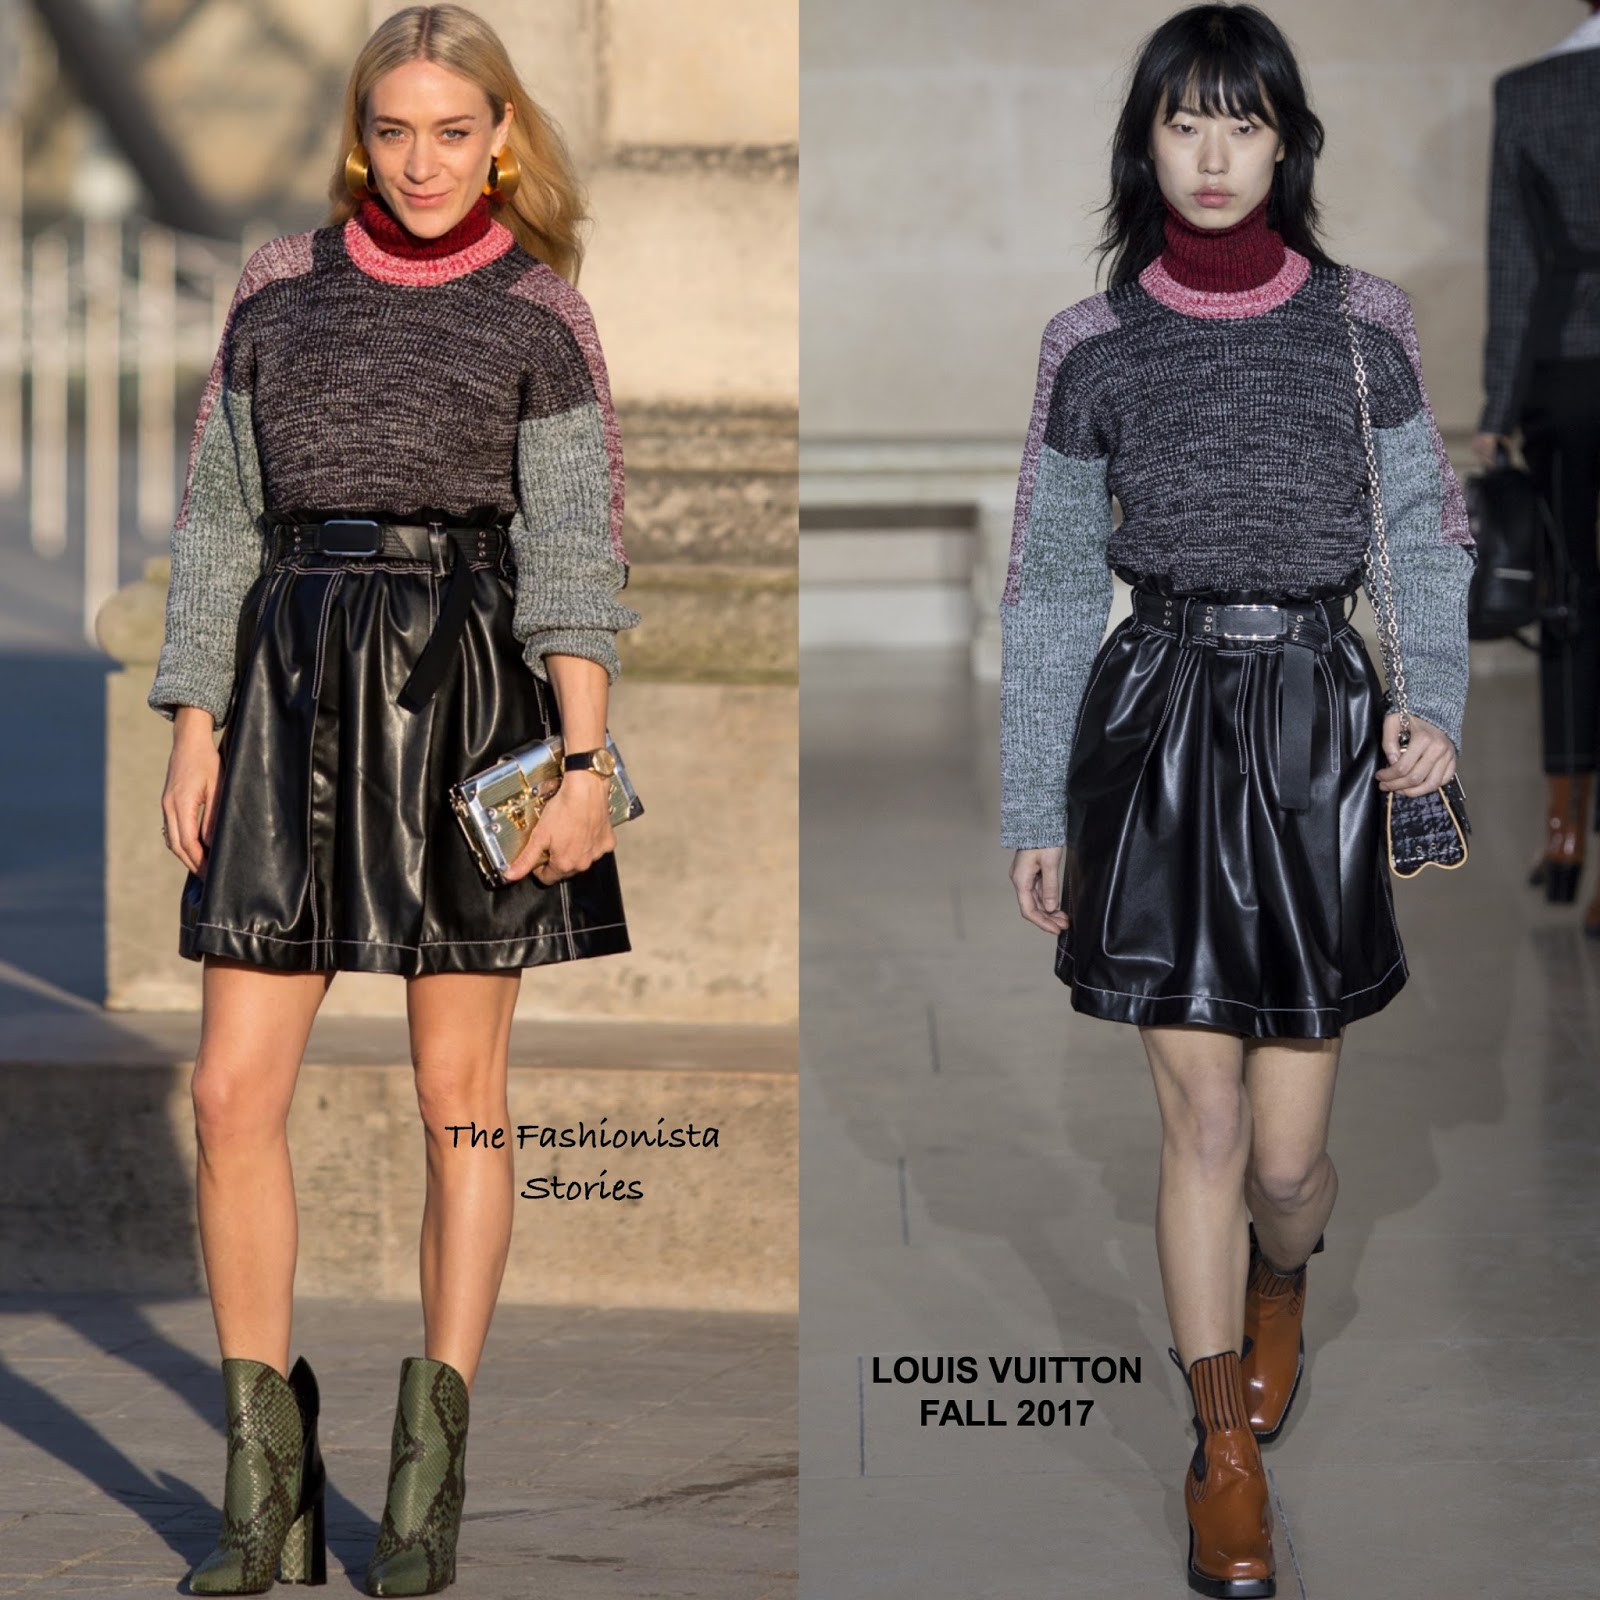 Chloe Sevigny in Louis Vuitton at the Louis Vuitton x Jeff Koons  Collaboration Dinner